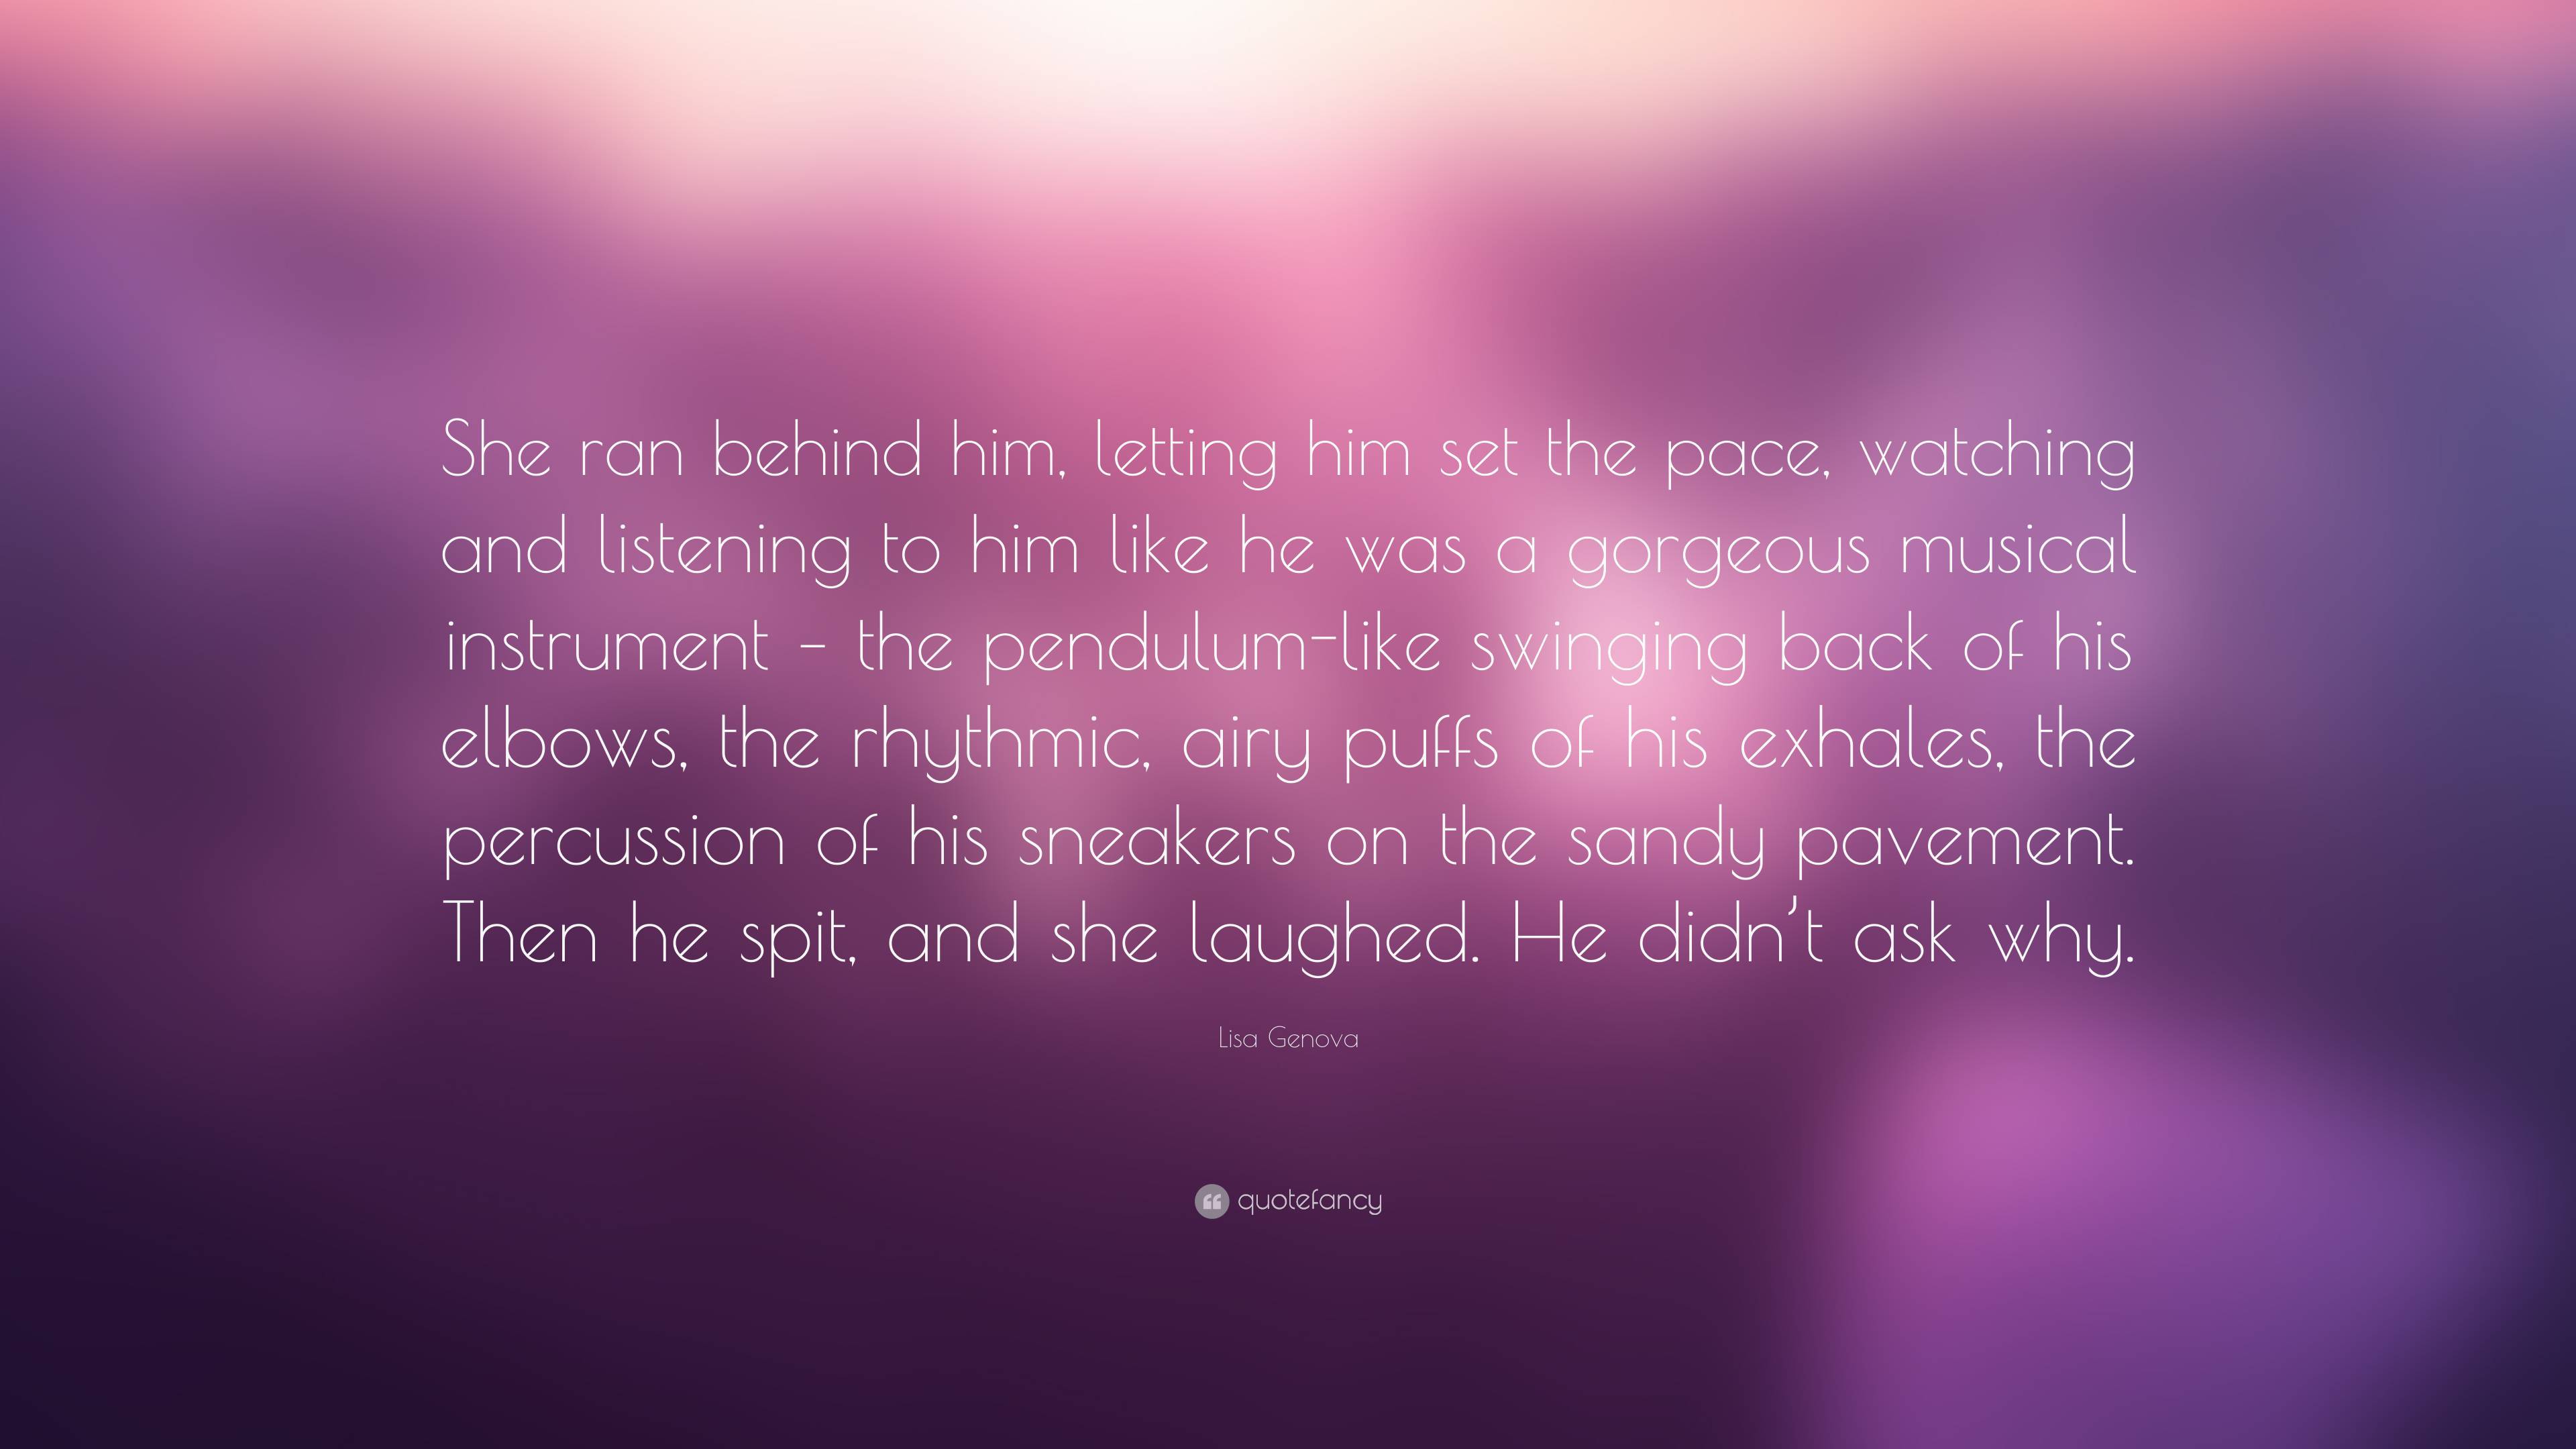 Lisa Genova Quote: “She ran behind him, letting him set the pace ...